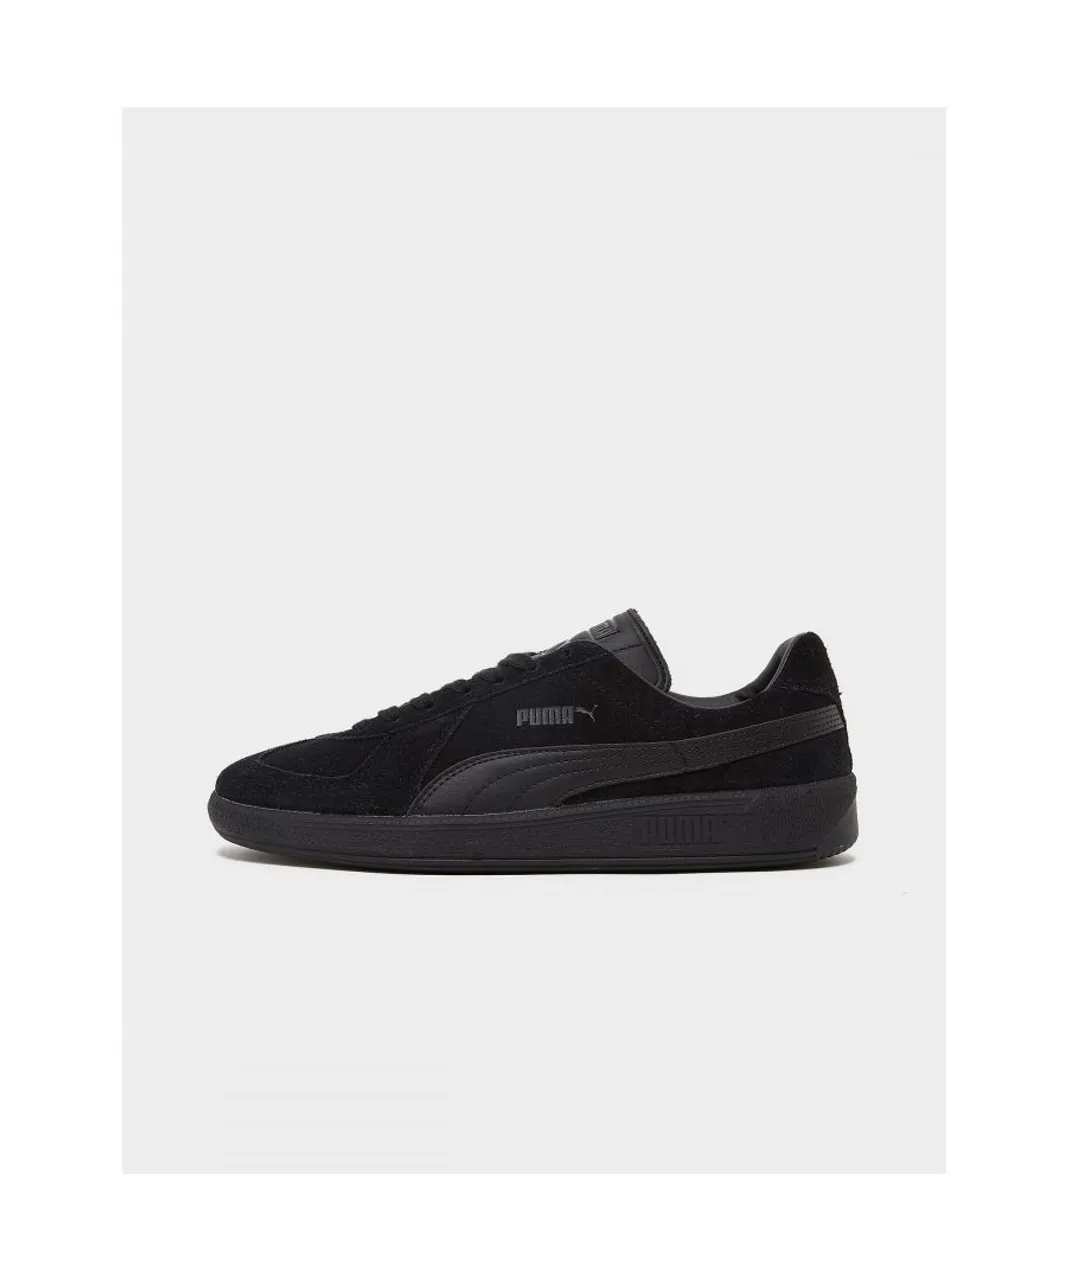 Puma Mens Unisex Army Trainer Suede Sneakers - Black Leather